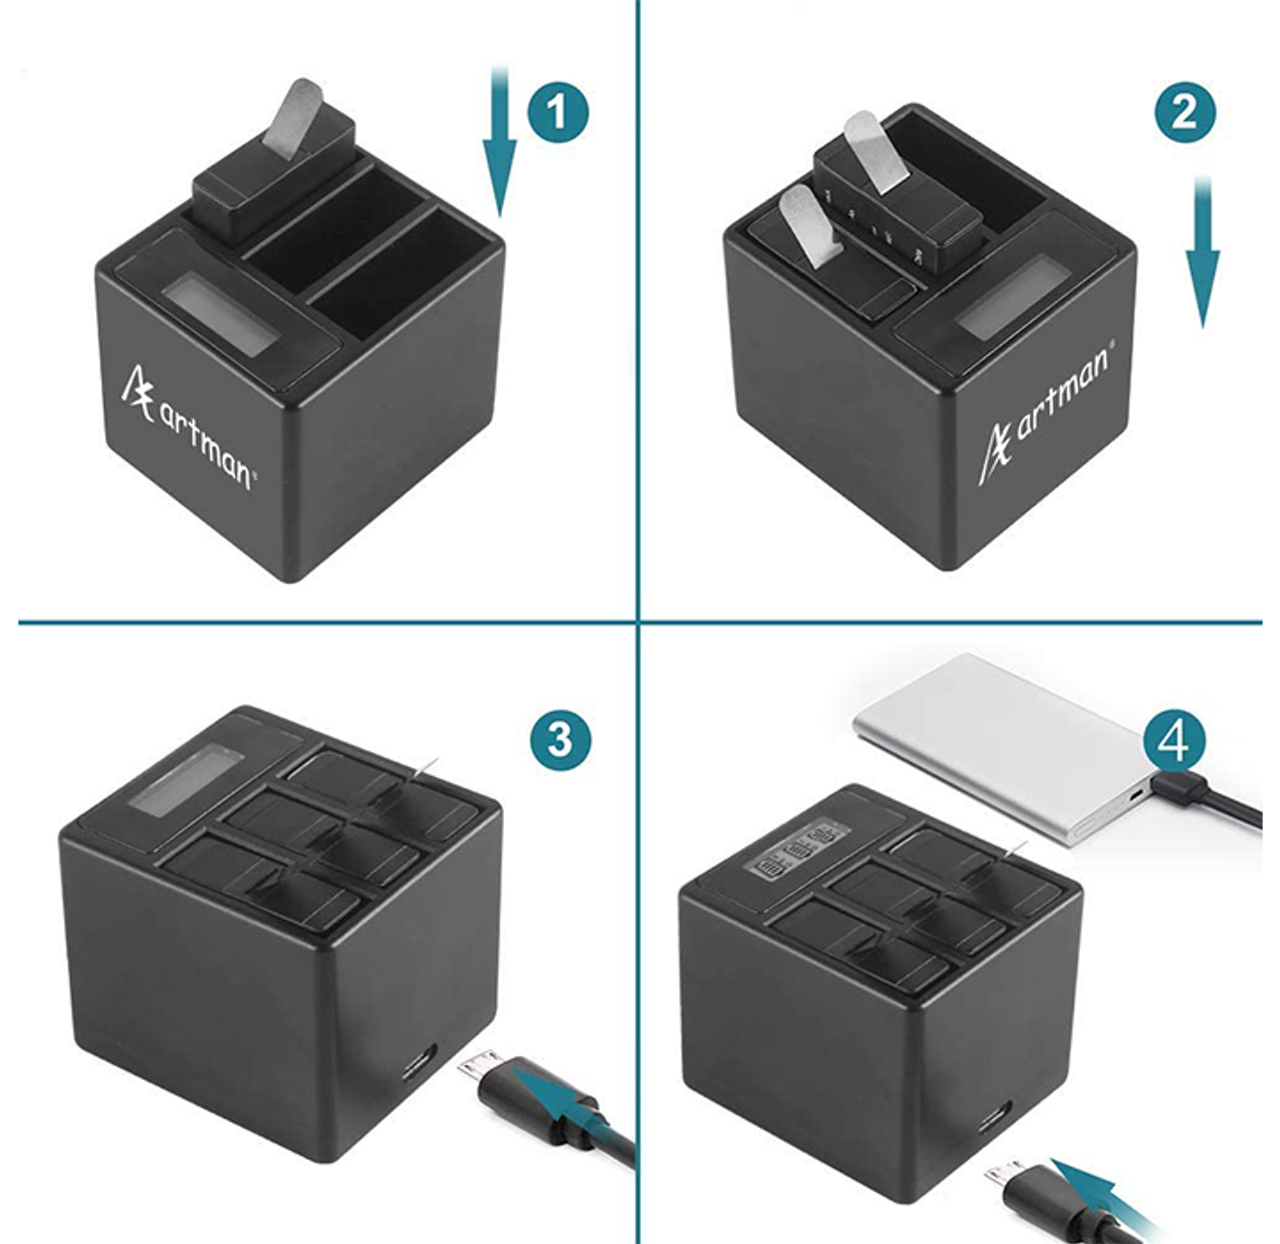 Artman GoPro Hero 5/6/7 Batteries (3-Pack) and 3-Channel Charger product image